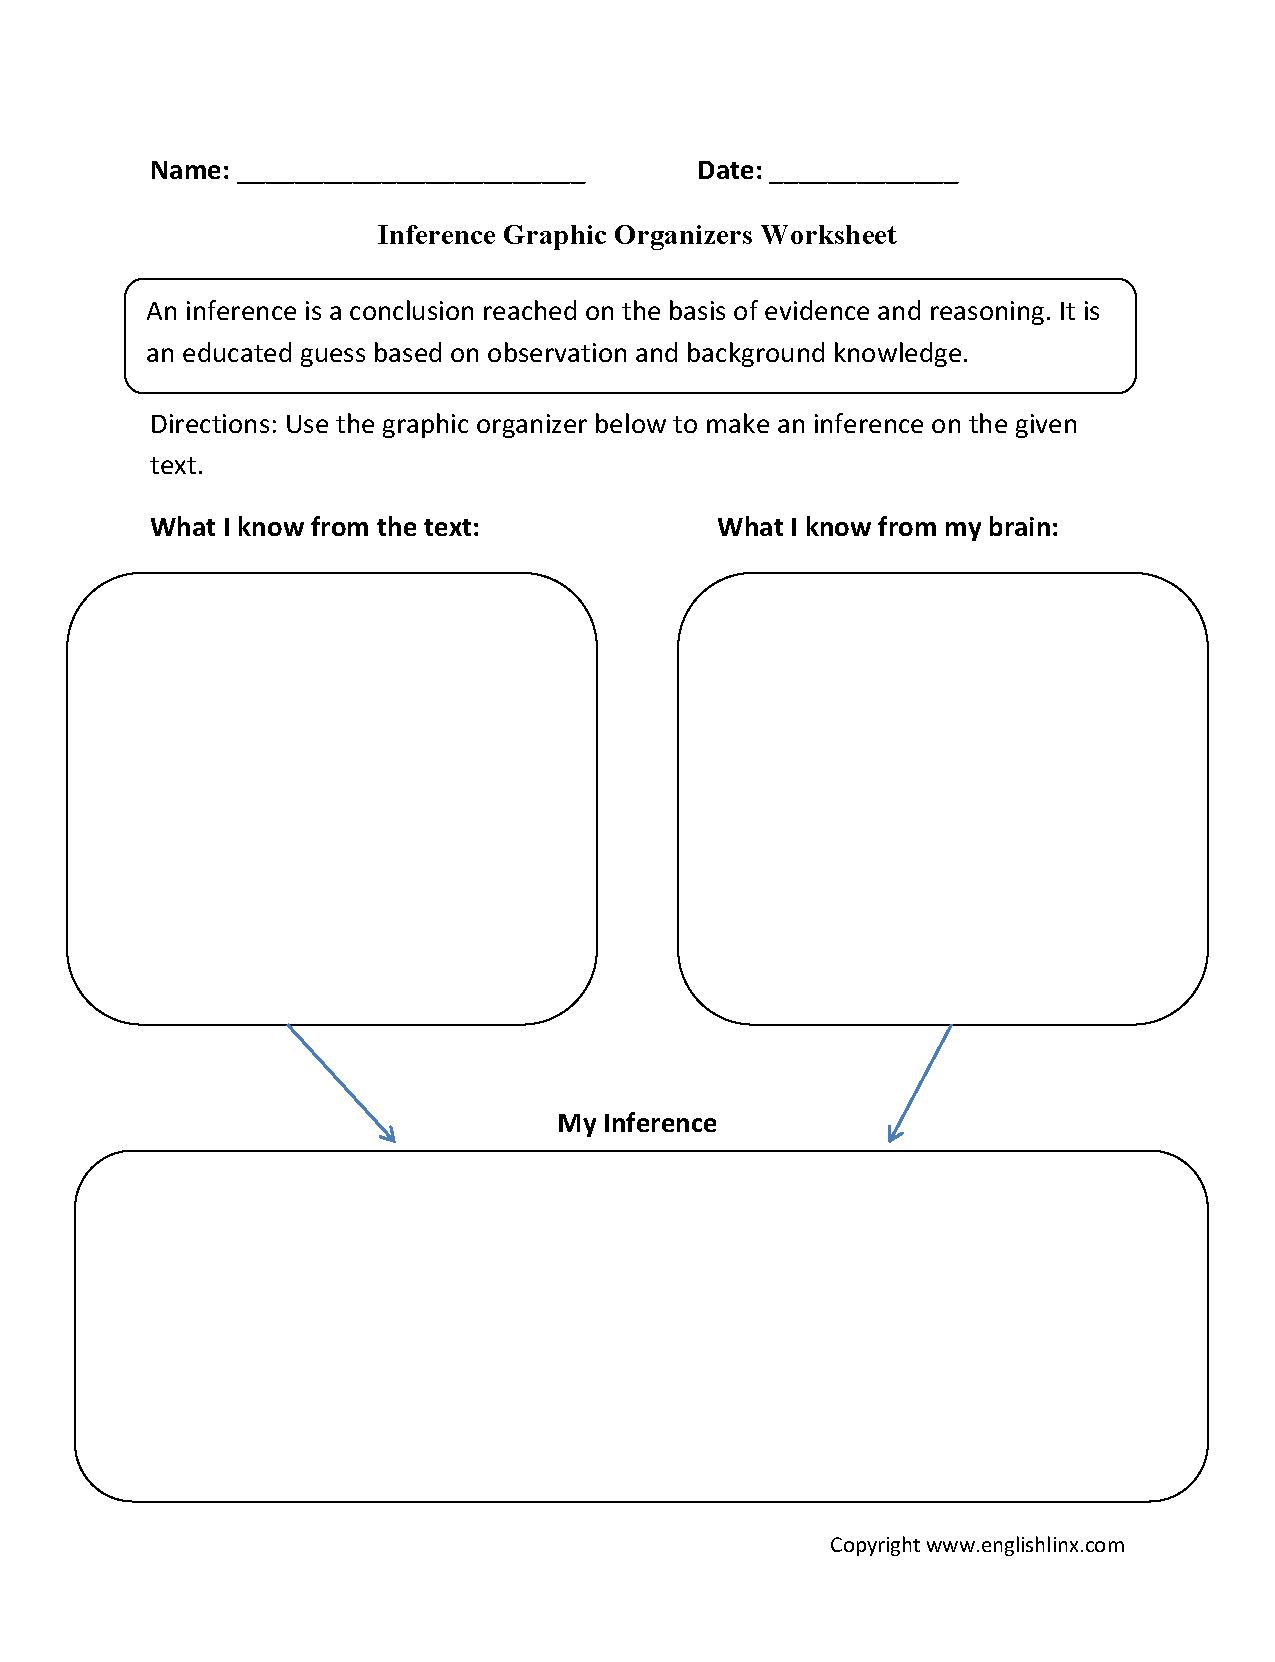 Graphic Organizers Worksheets | Inference Graphic Organizers Worksheets - Free Printable Graphic Organizers